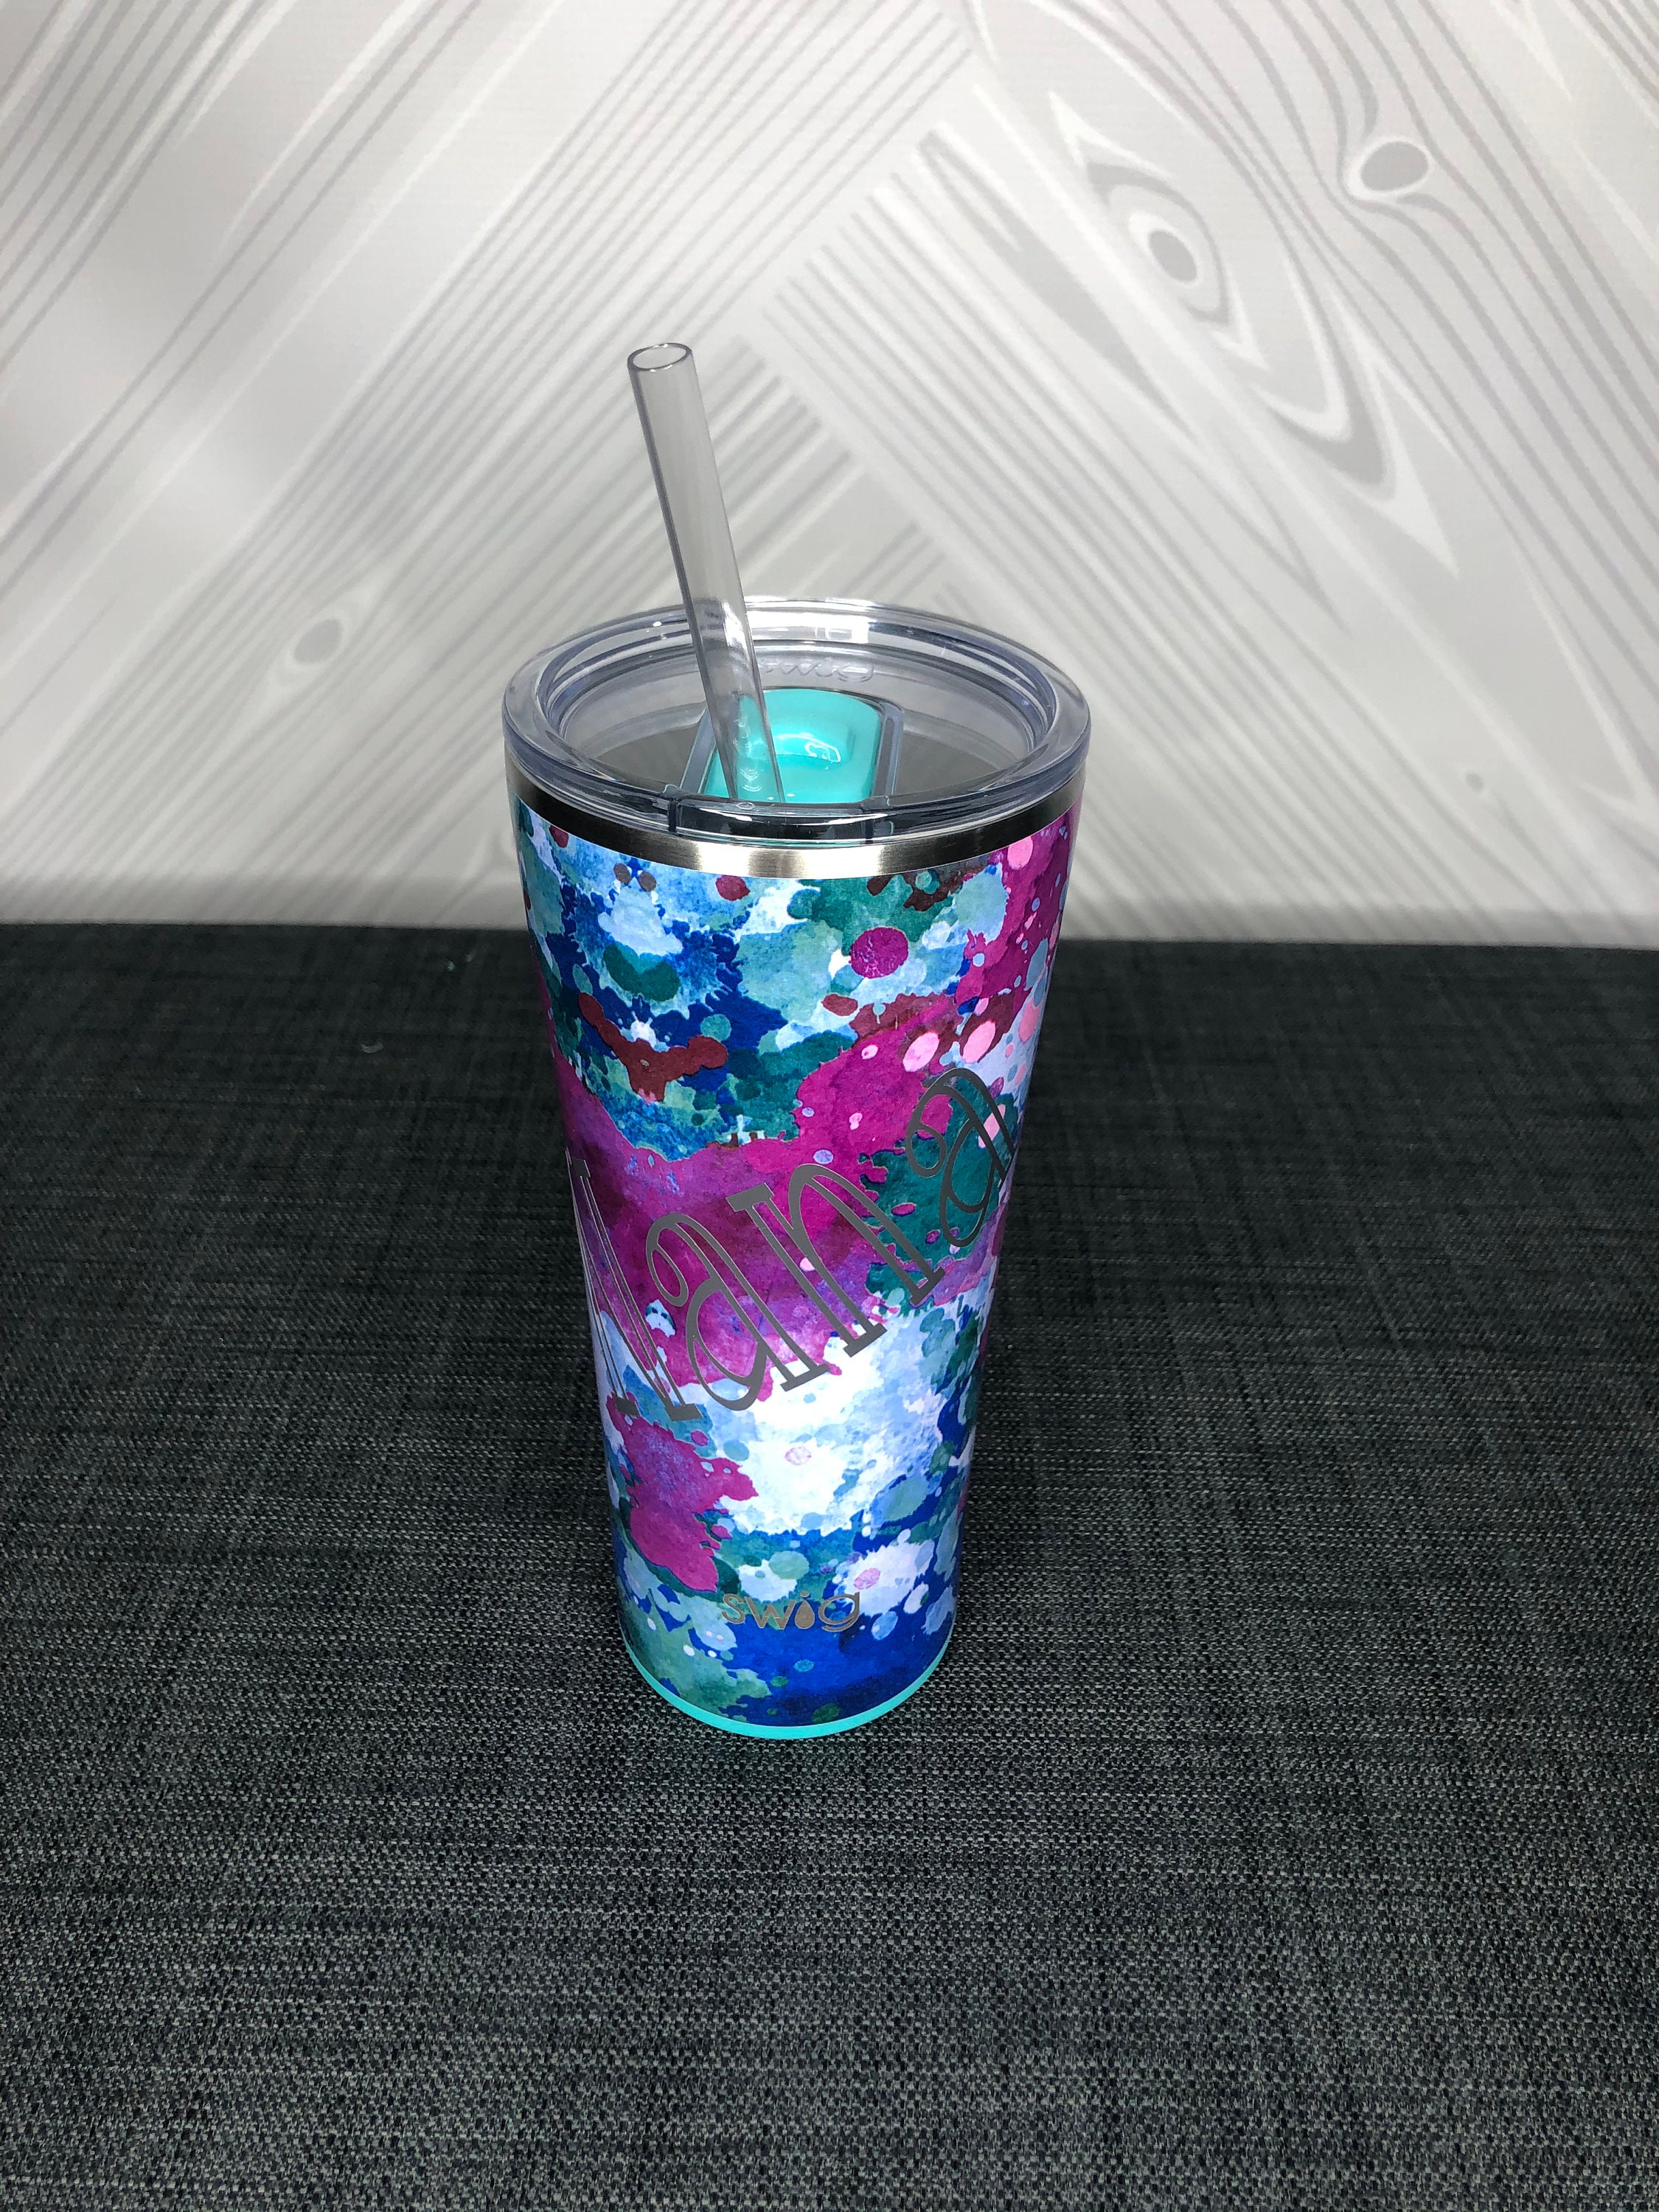 Swig Life 22oz Solid Insulated Tumblers